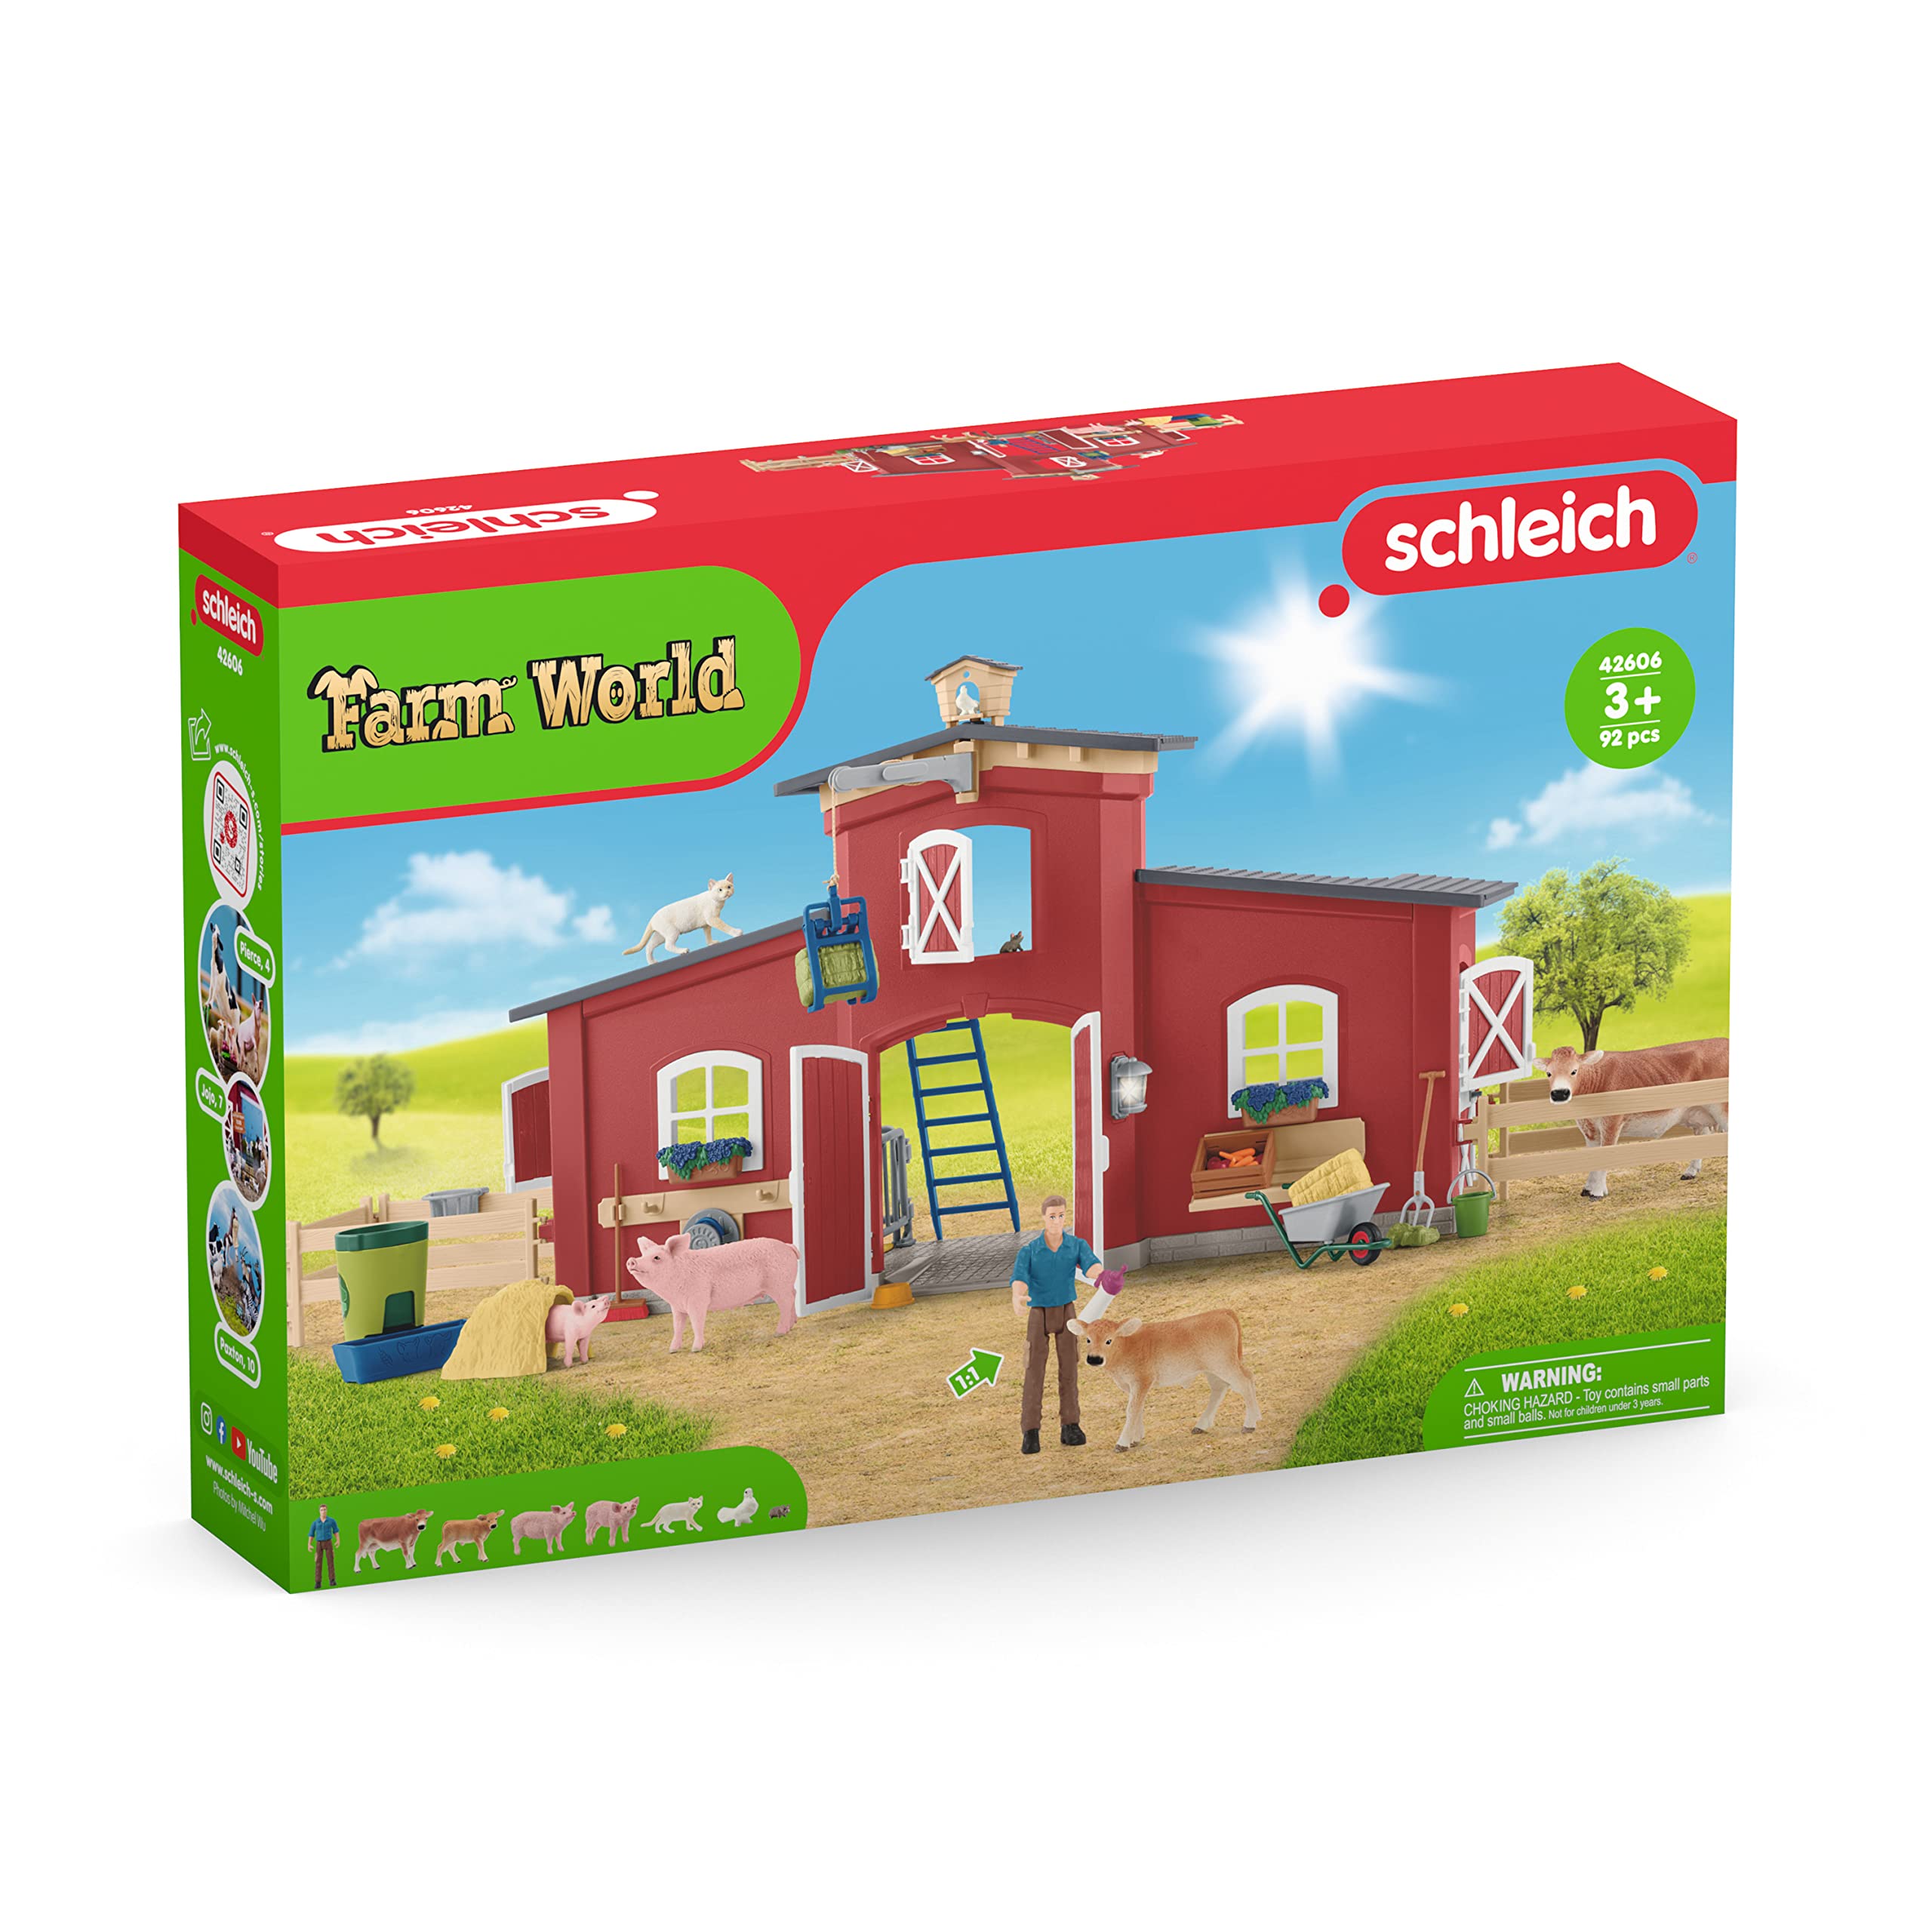 Schleich Farm World, Farm Animal Toys and Sets for Kids, Red Barn Playset with Farm Animal Figurines, Red